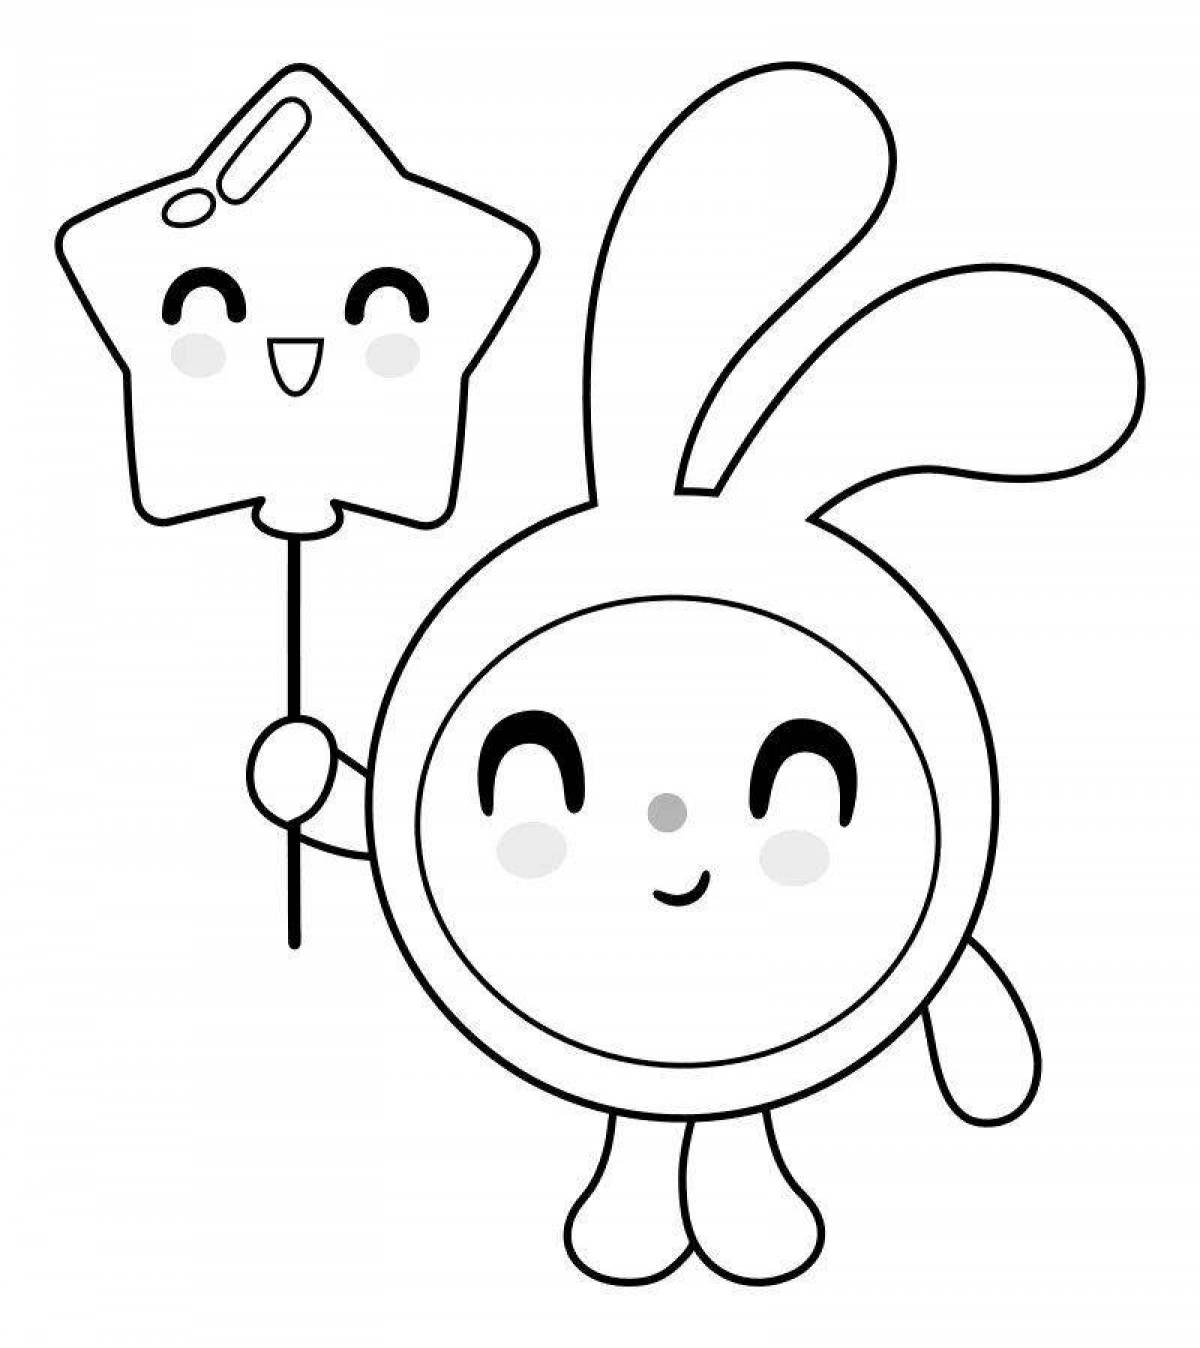 Coloring page adorable baby